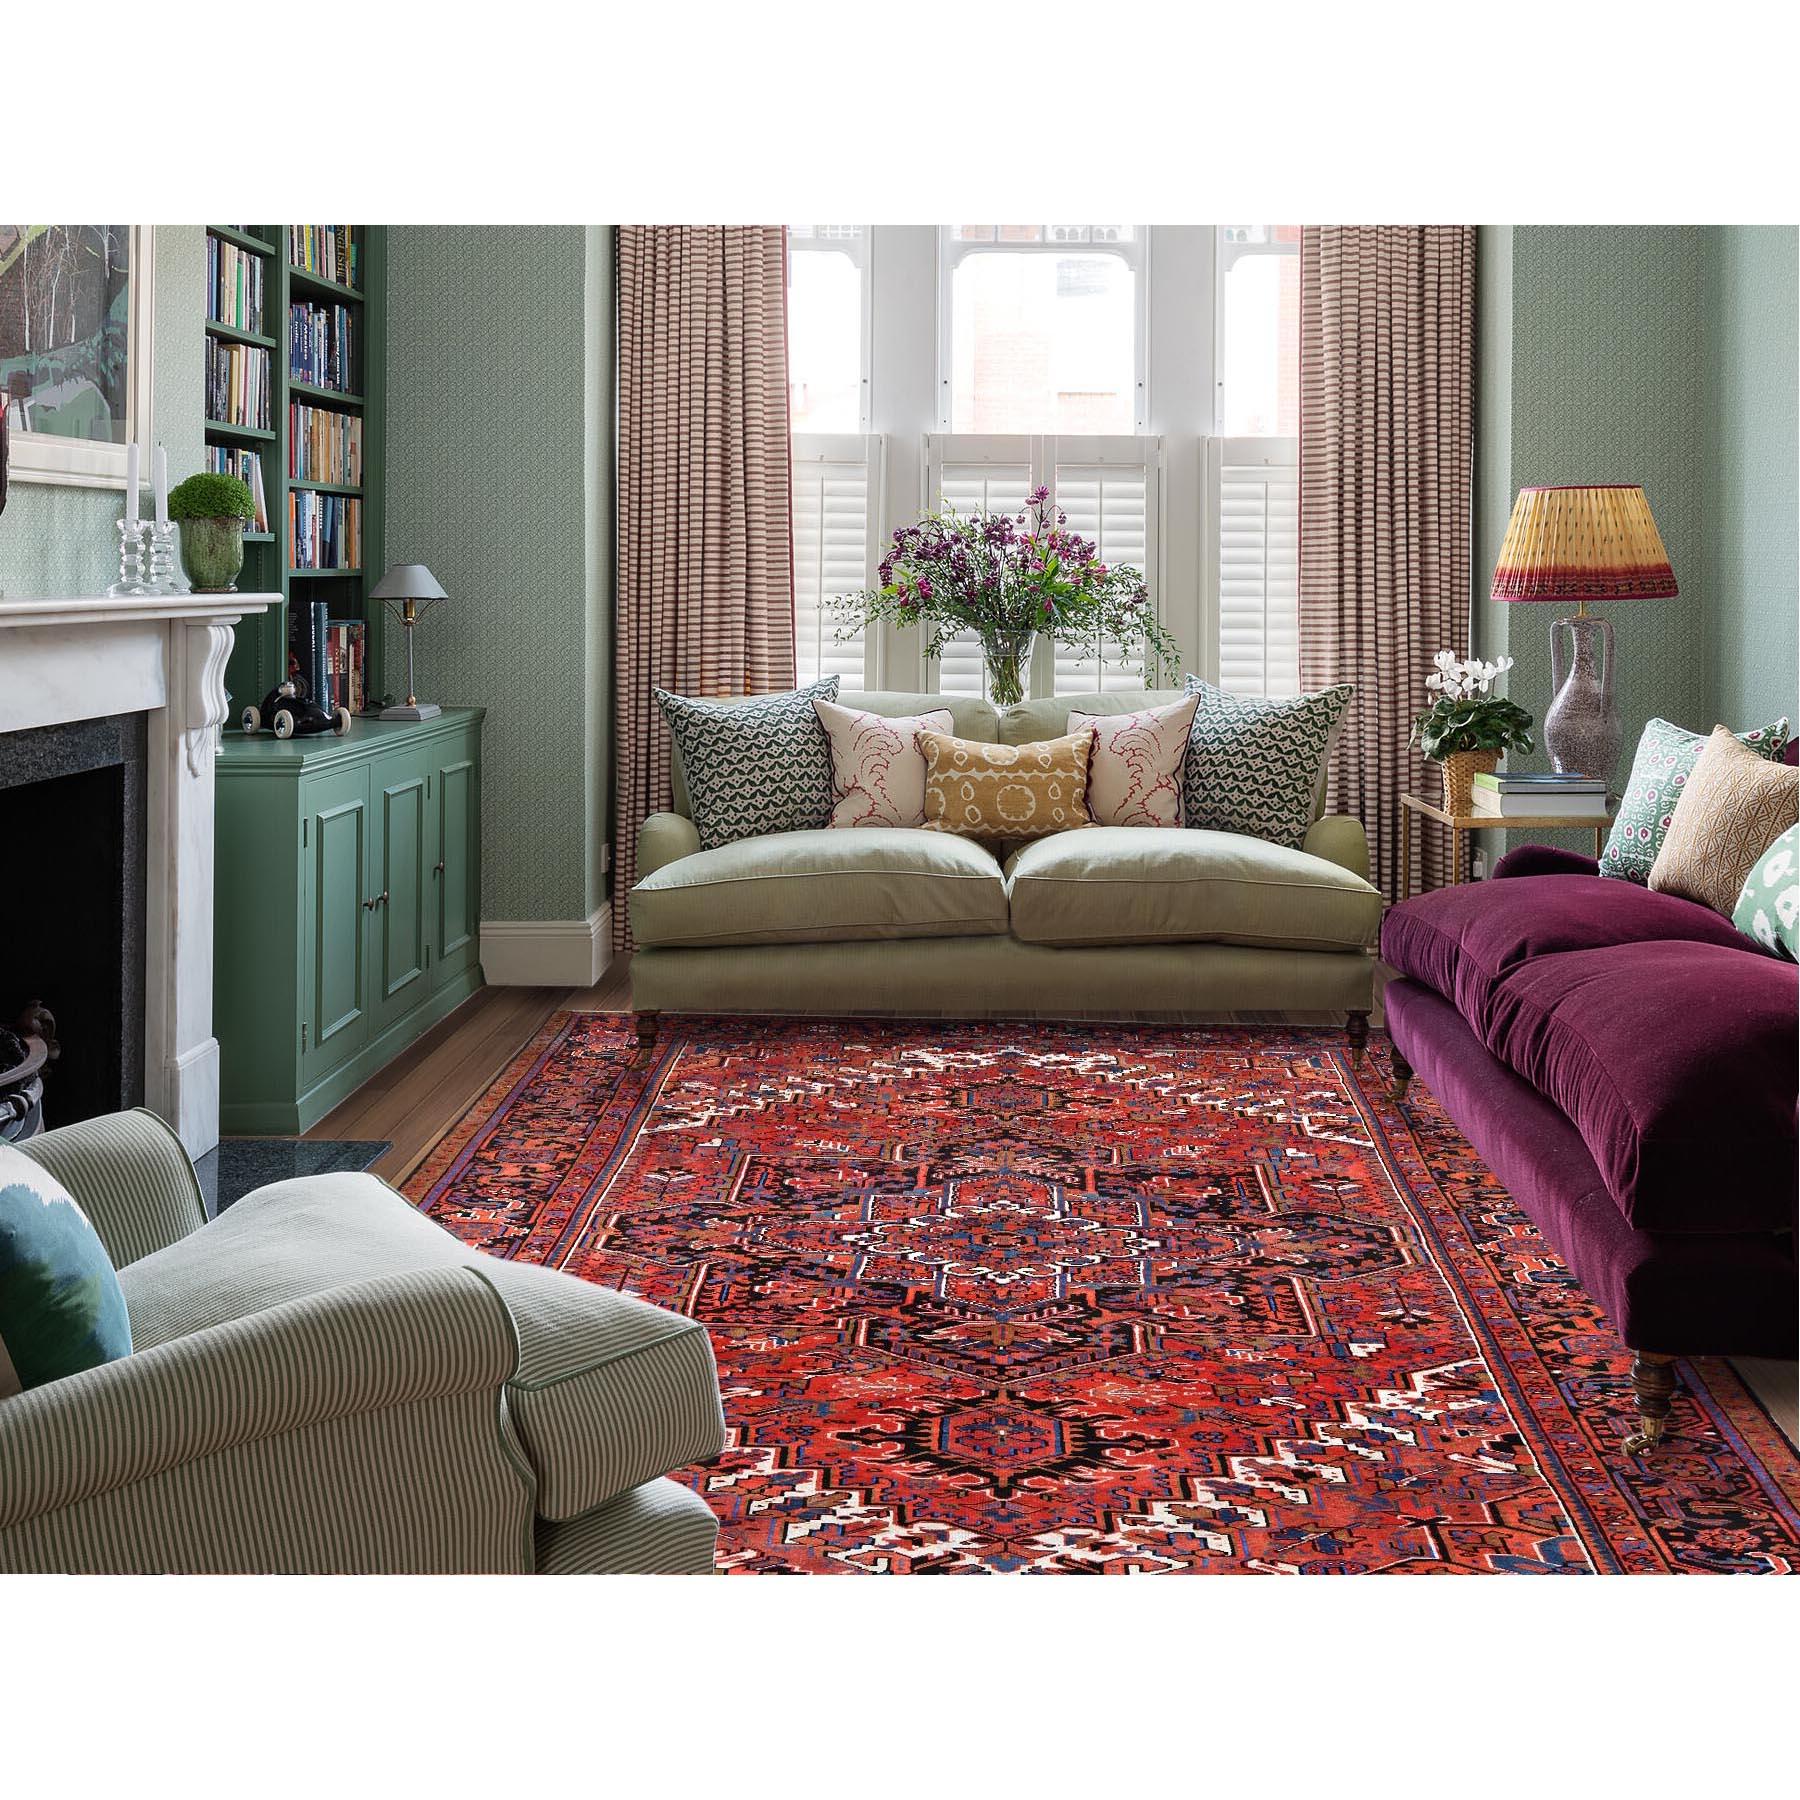 This fabulous Hand-Knotted carpet has been created and designed for extra strength and durability. This rug has been handcrafted for weeks in the traditional method that is used to makeExact Rug Size in Feet and Inches : 9'8